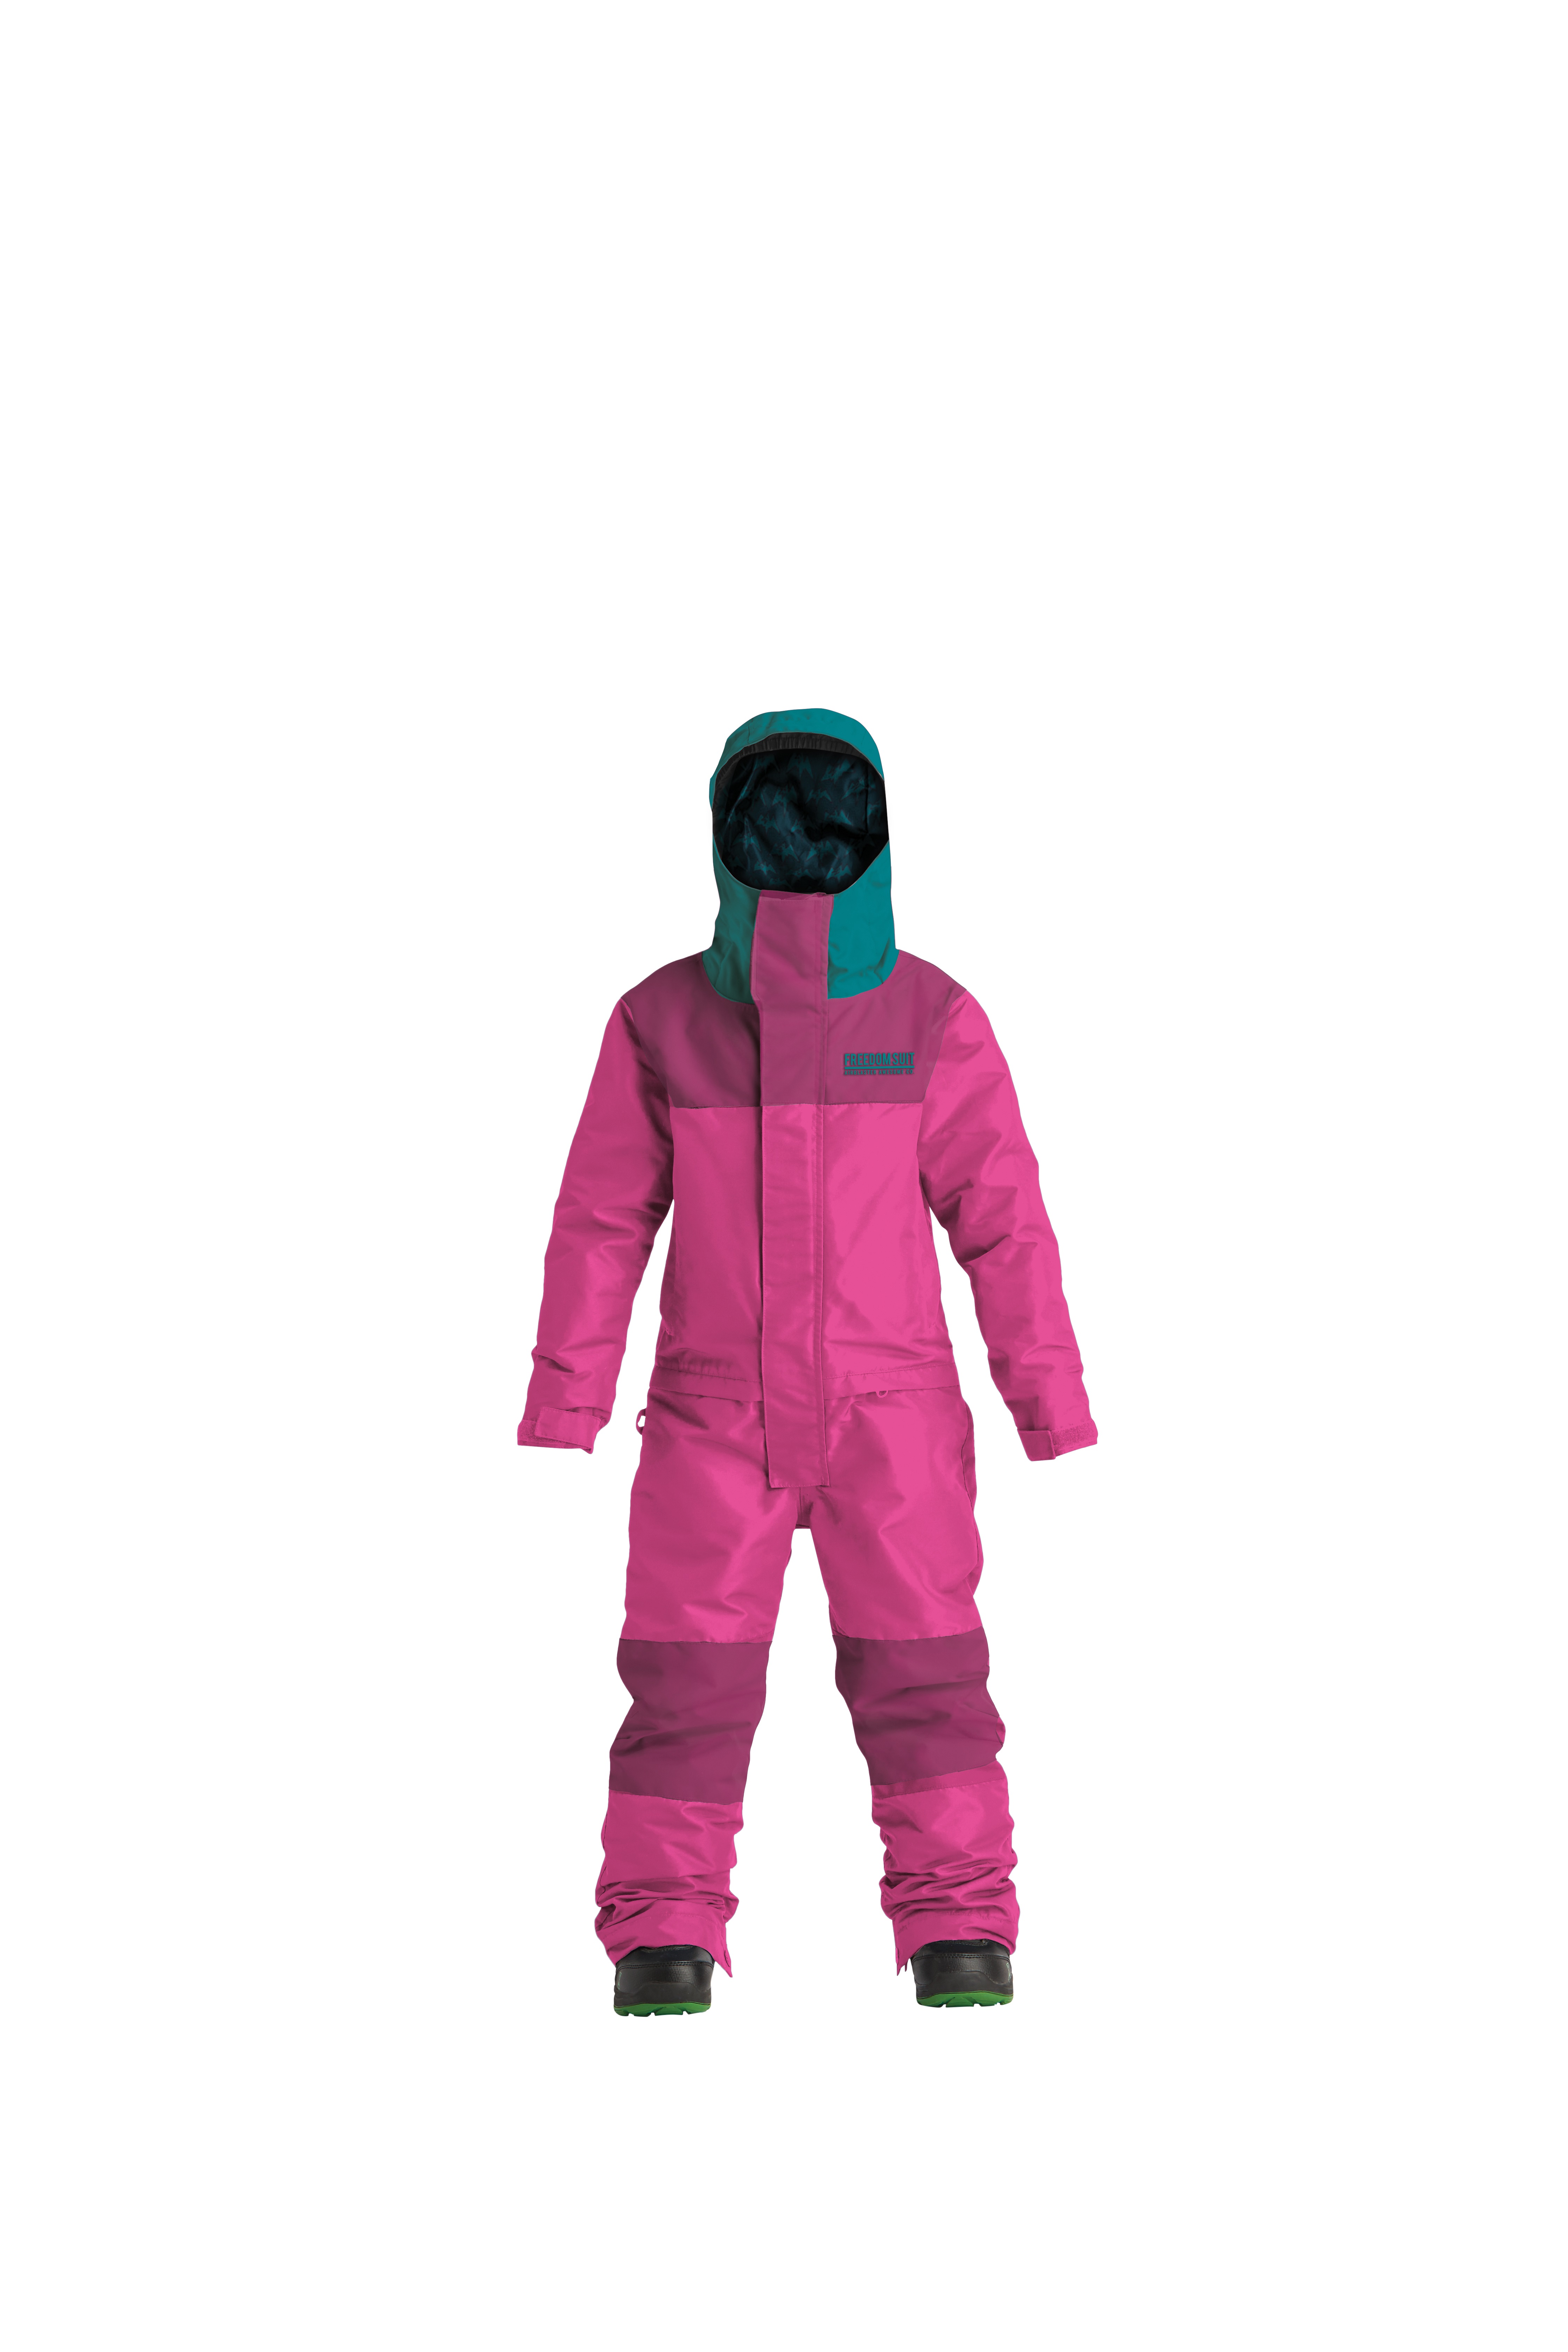 Salopeta AIRBLASTER Youth Freedom Suit Hot Pink